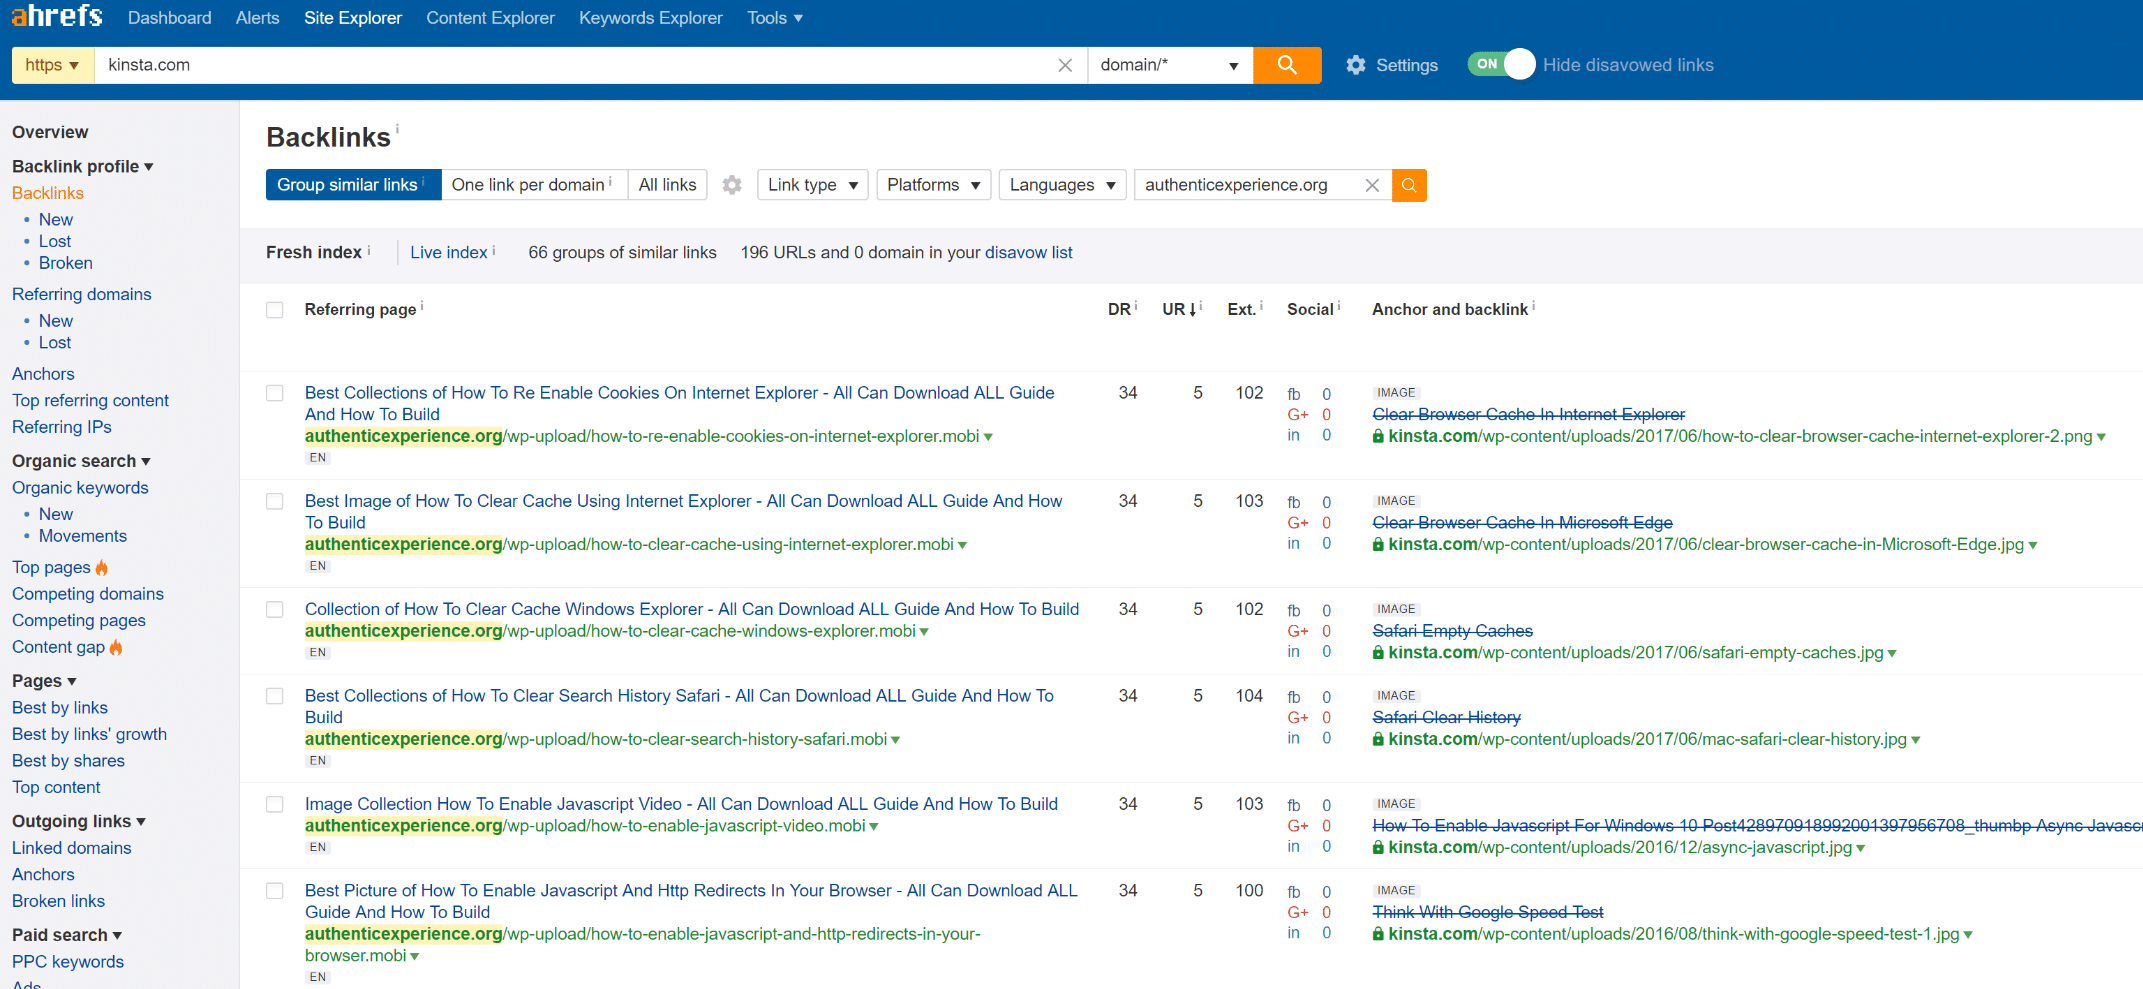 Ahrefs backlinks to copied images